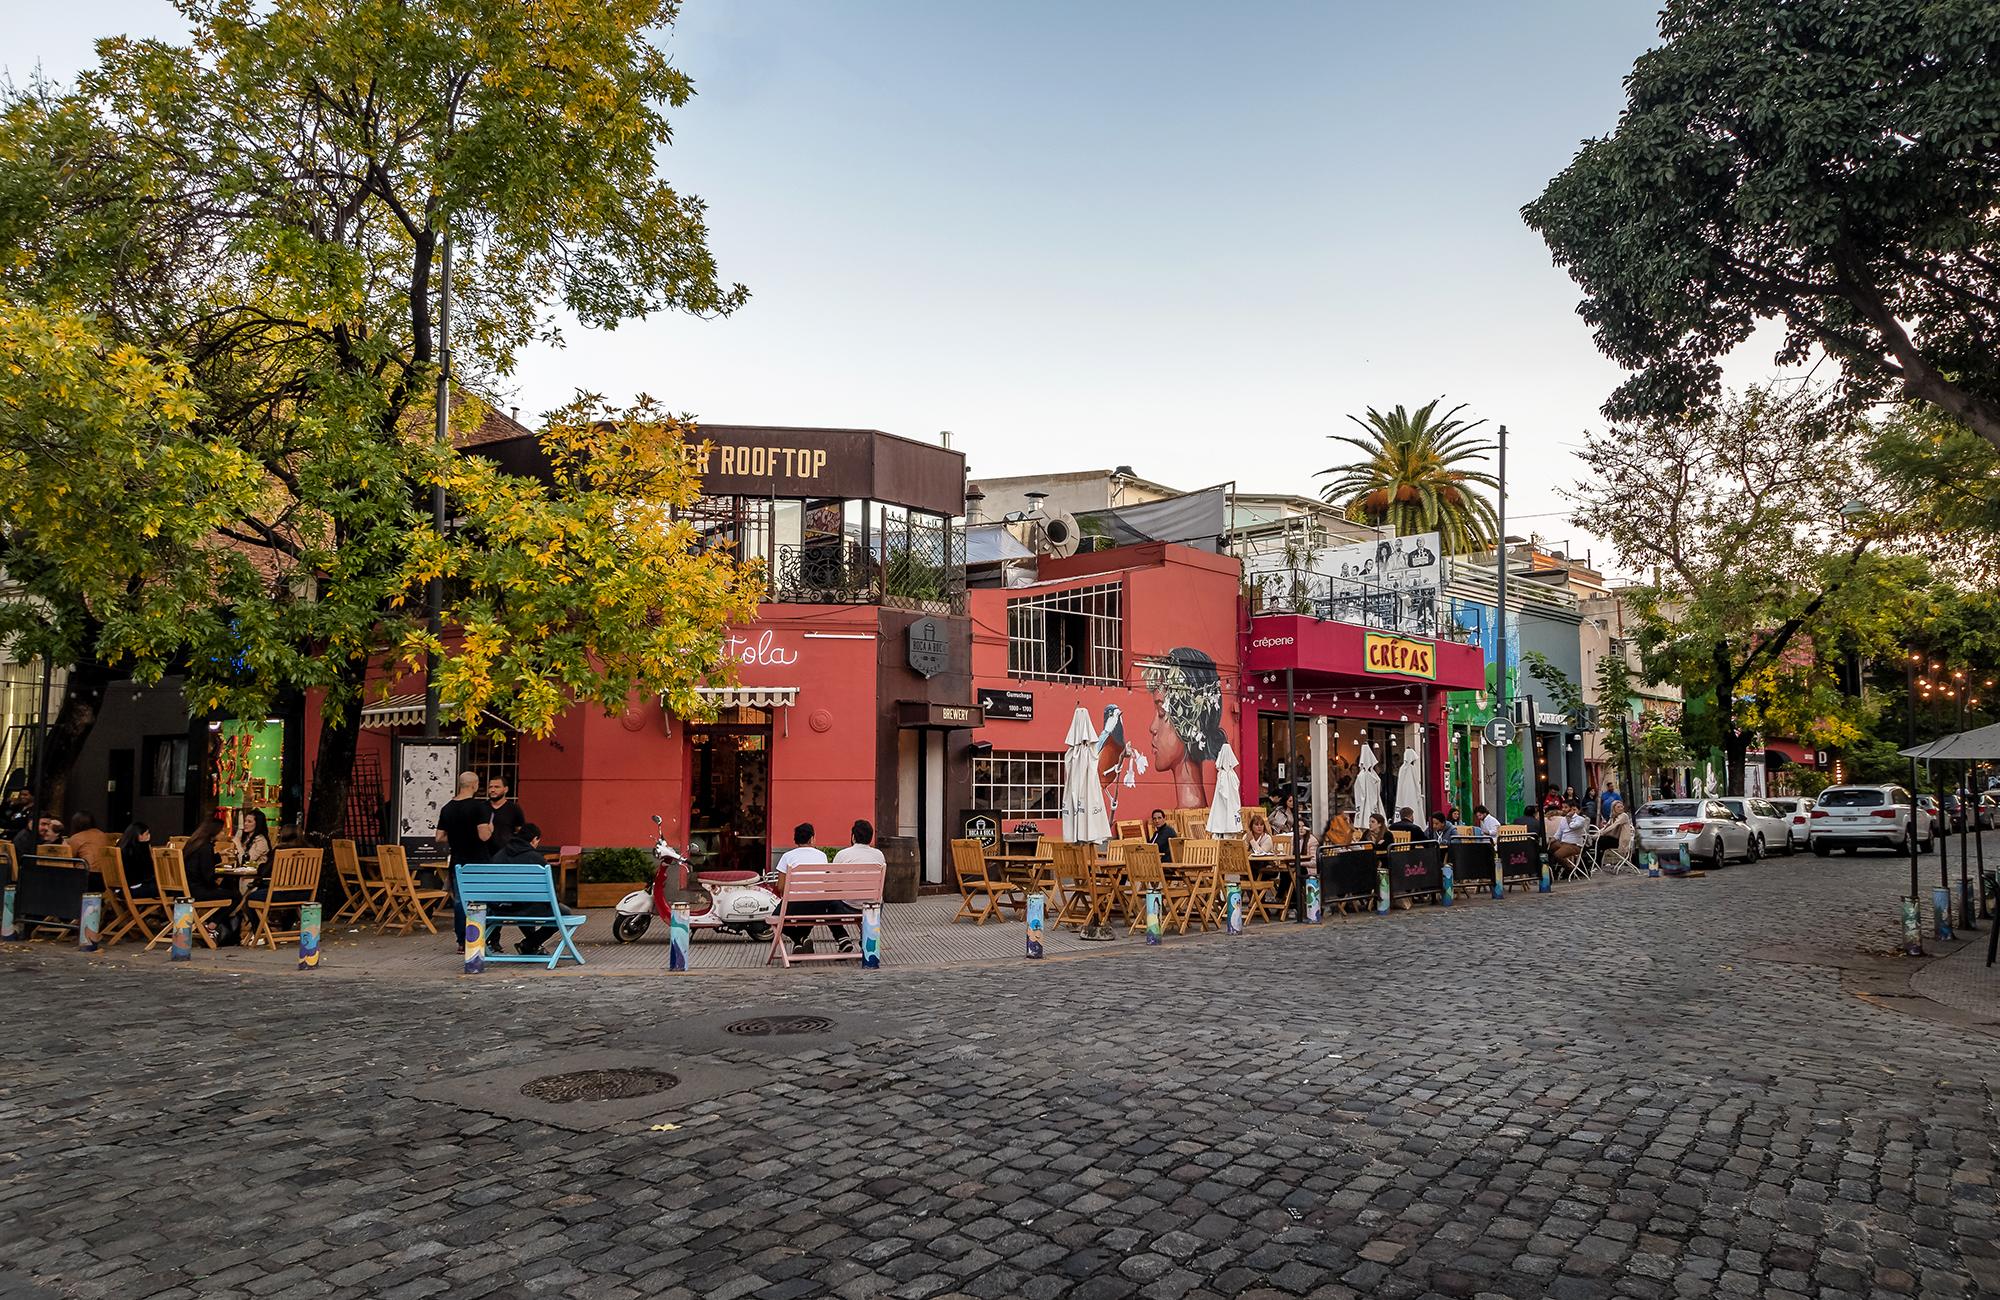 What to Do in Buenos Aires Most Popular Neighborhood, Palermo